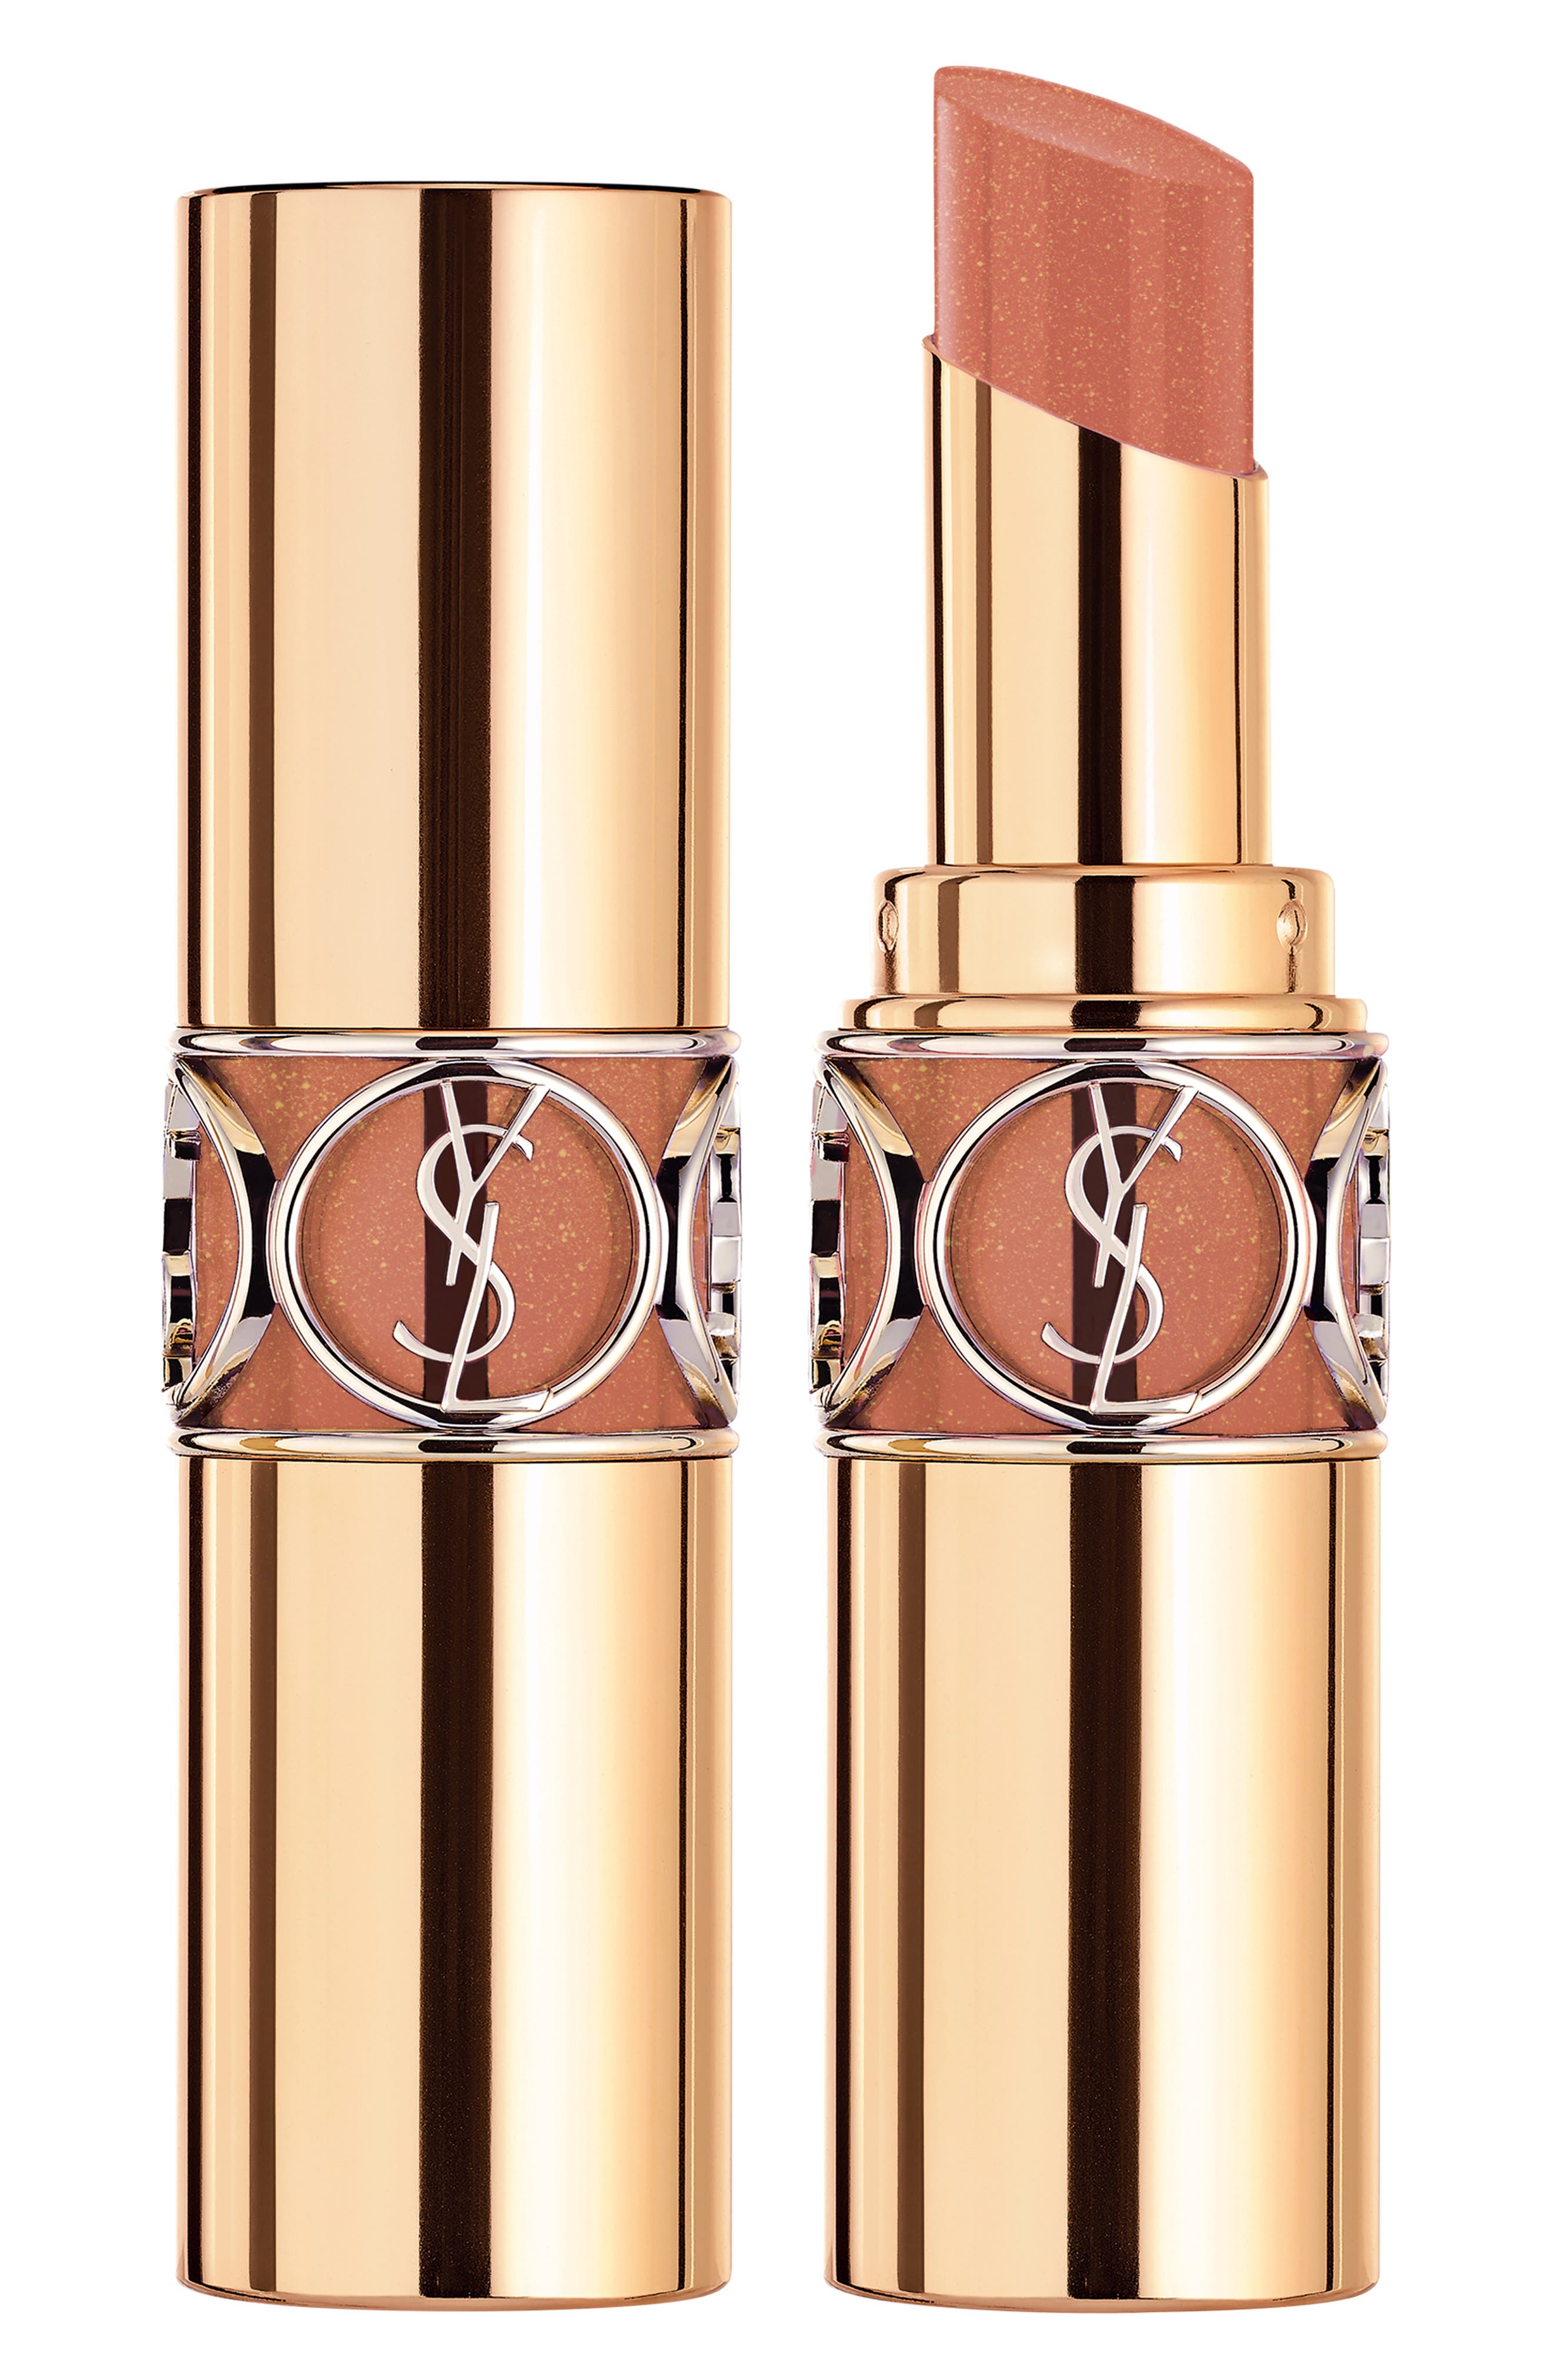 Yves Saint Laurent Rouge Volupte Shine Oil-in-Stick Lipstick Balm in Nude Transparent